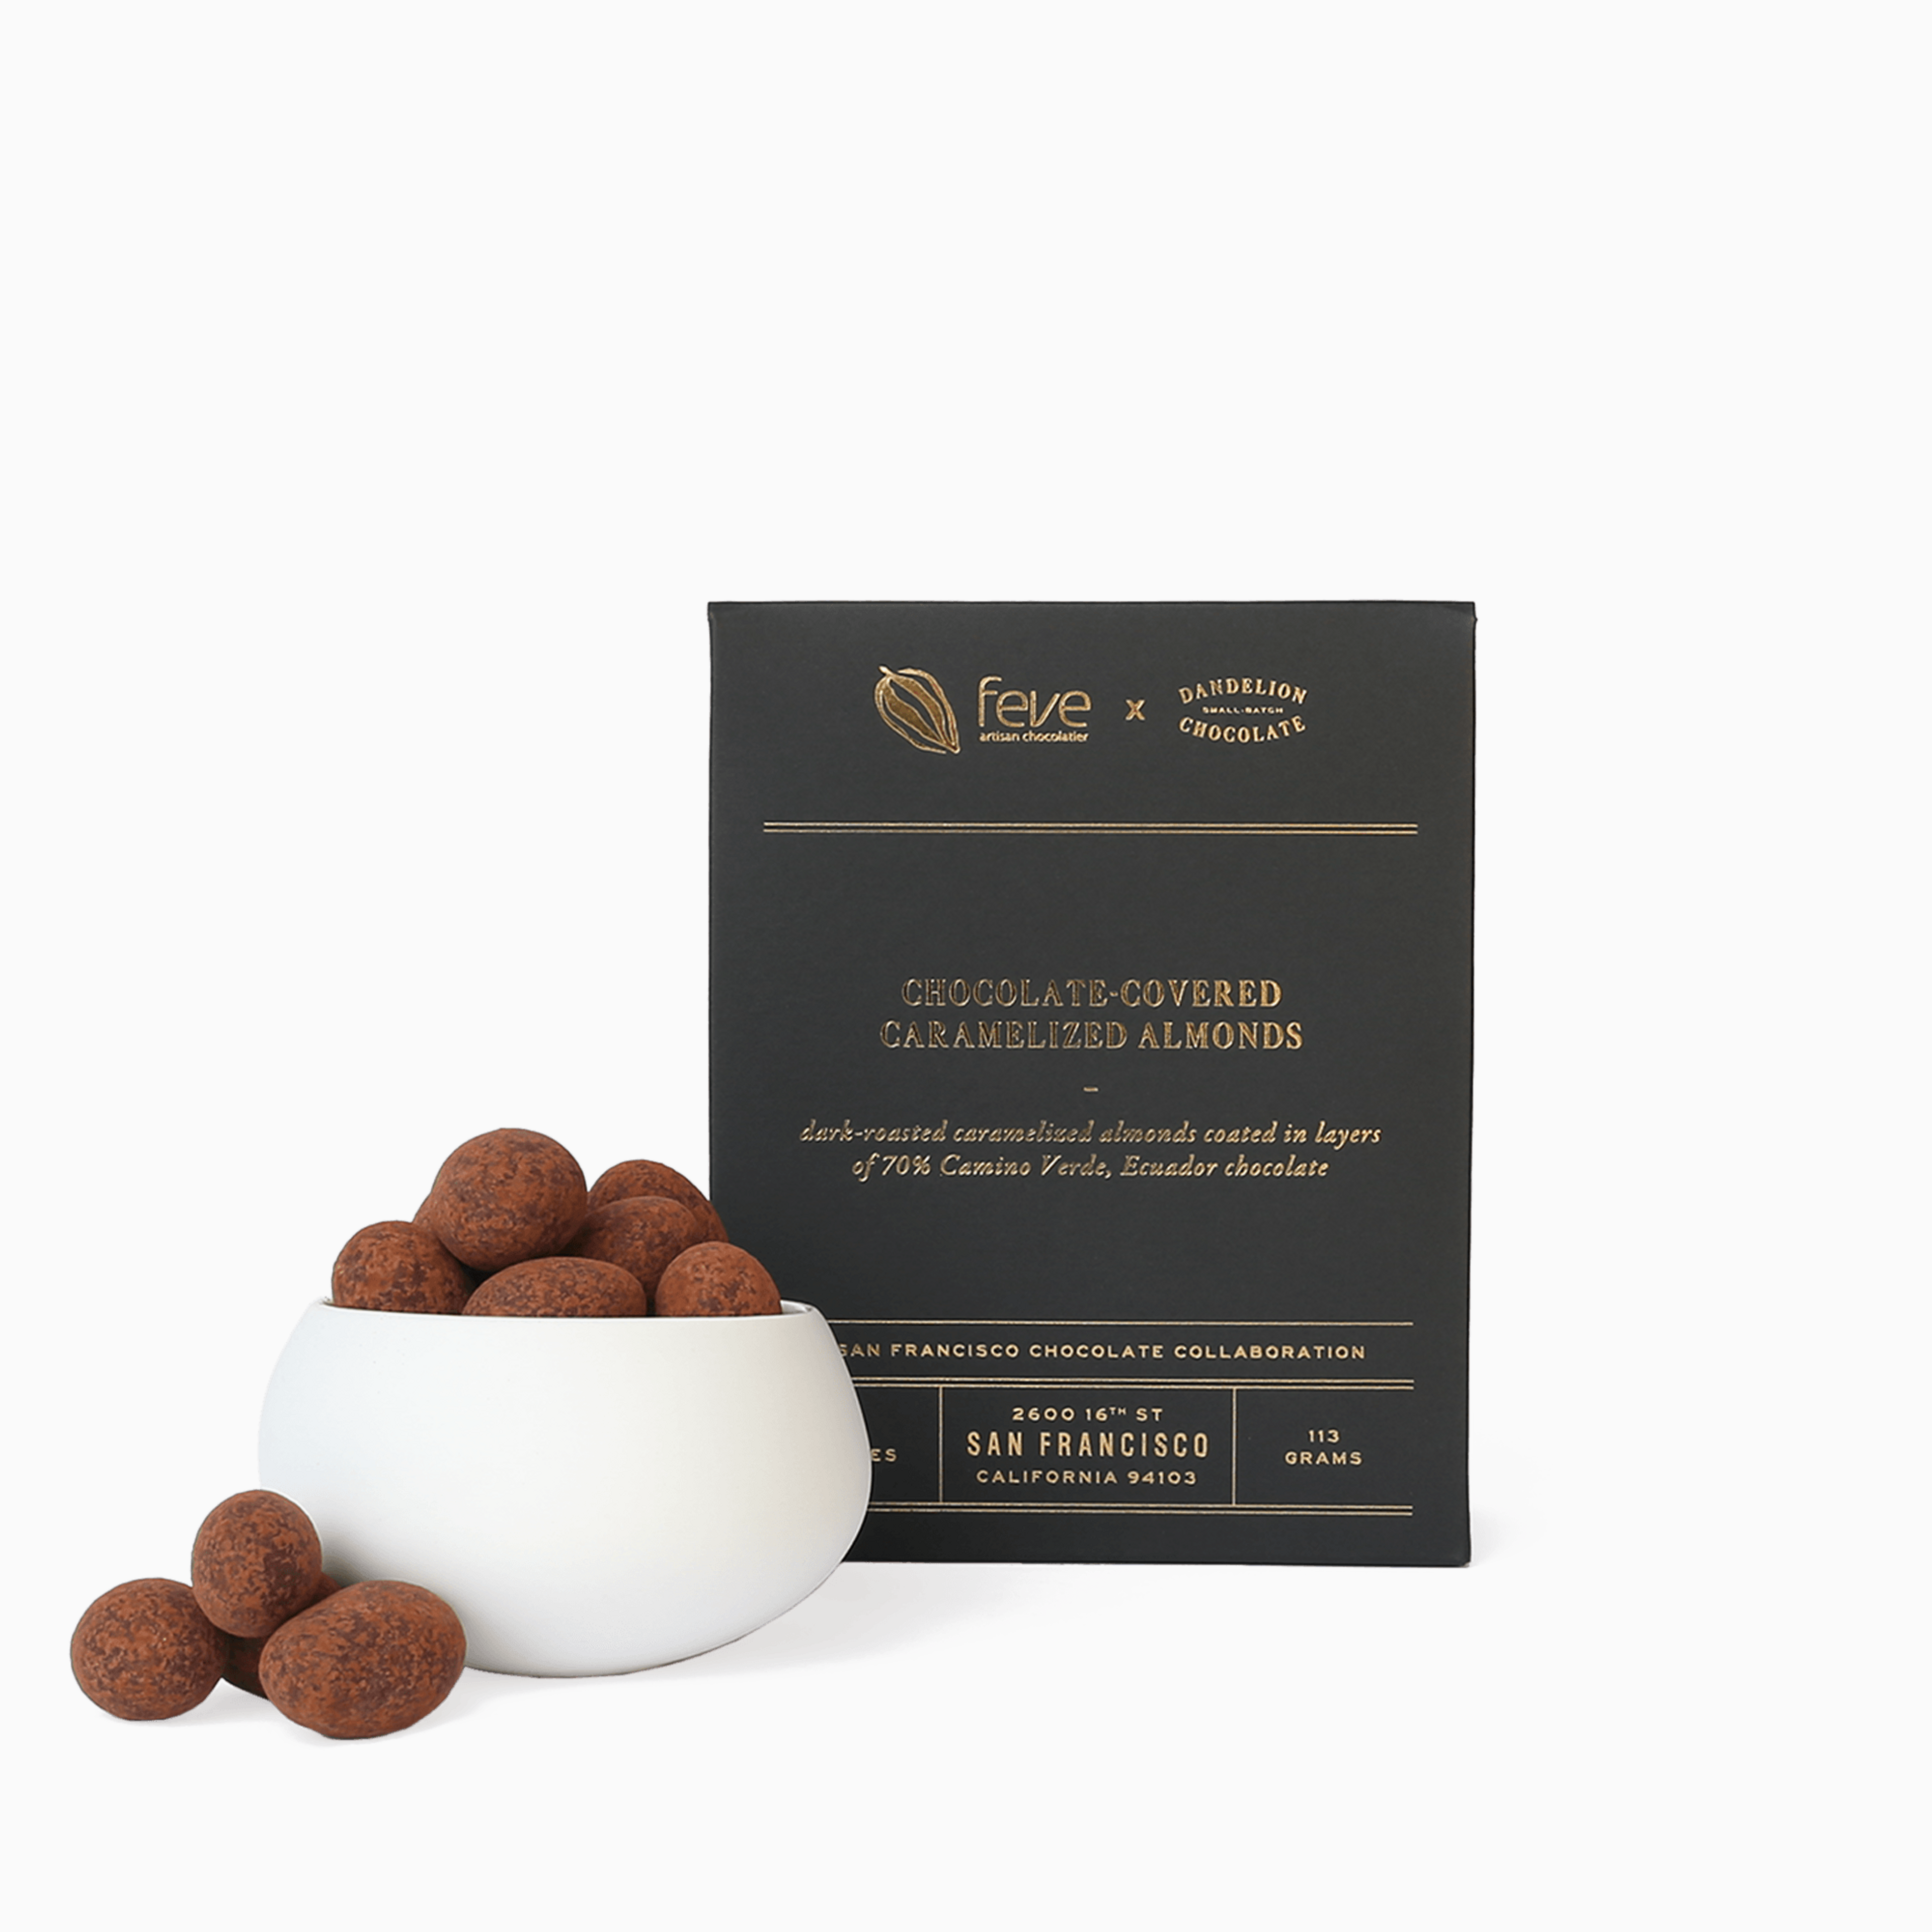 Chocolate-Covered Caramelized Almonds